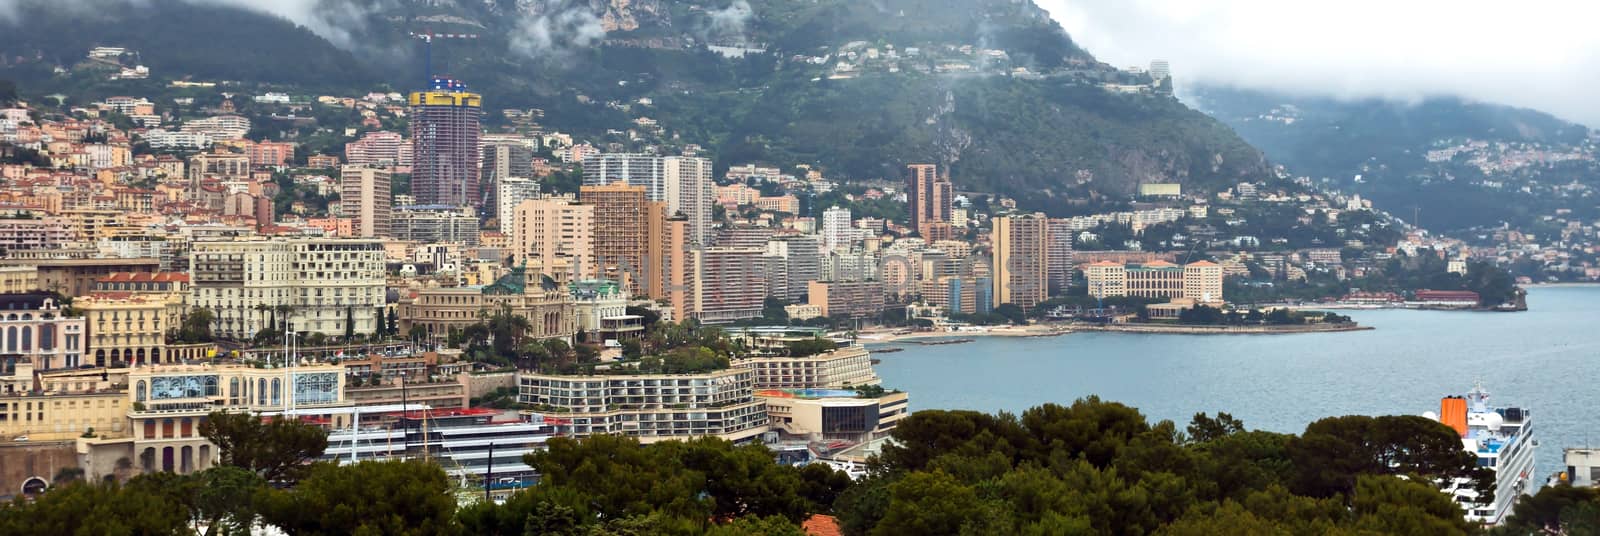 MONTE CARLO, MONACO - APRIL 28: Panoramic view of city on April 28, 2013 in Monte Carlo, Monaco. All buildings in Monaco is very expensive and fashionable.

Monte Carlo, Monaco - April 28, 2013: Panoramic view of city. All buildings in Monaco is very expensive and fashionable.